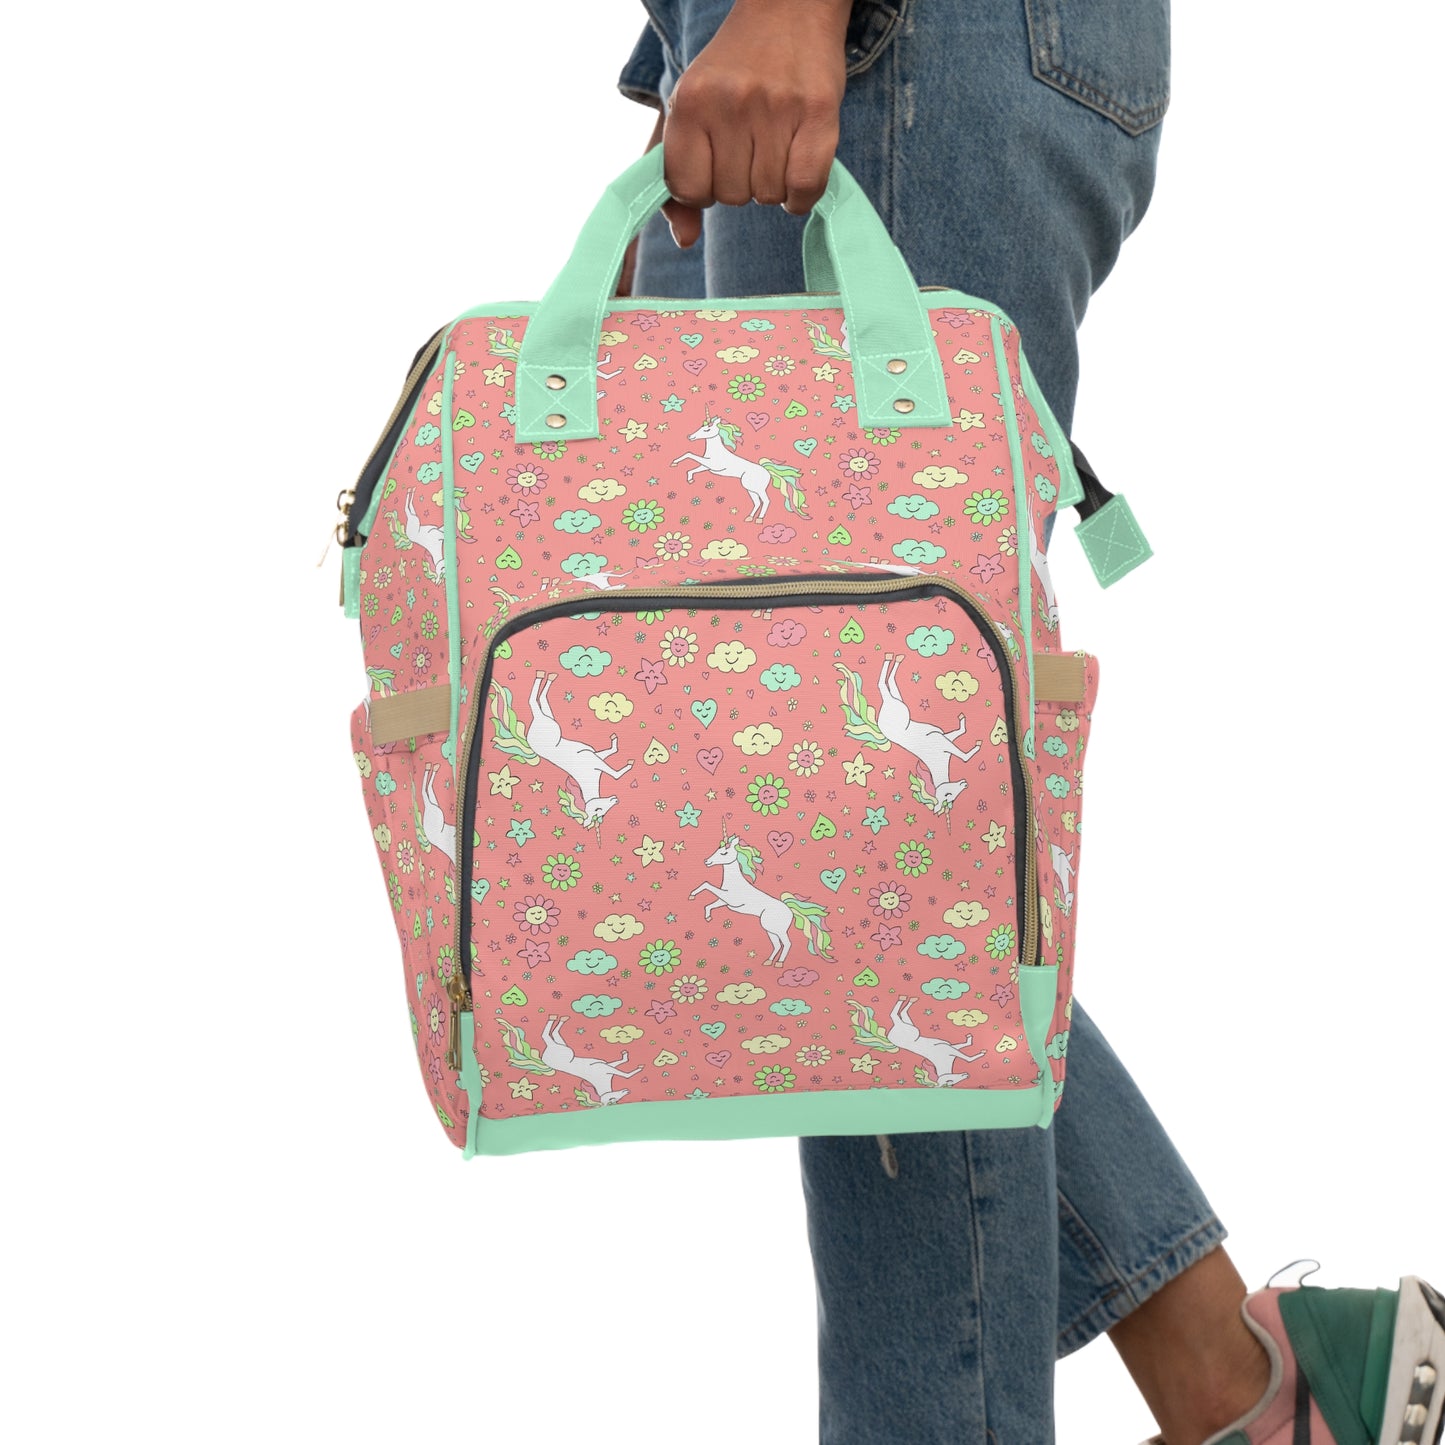 Pink unicorn-themed baby changing backpack, perfect for cloth nappies and on-the-go parenting